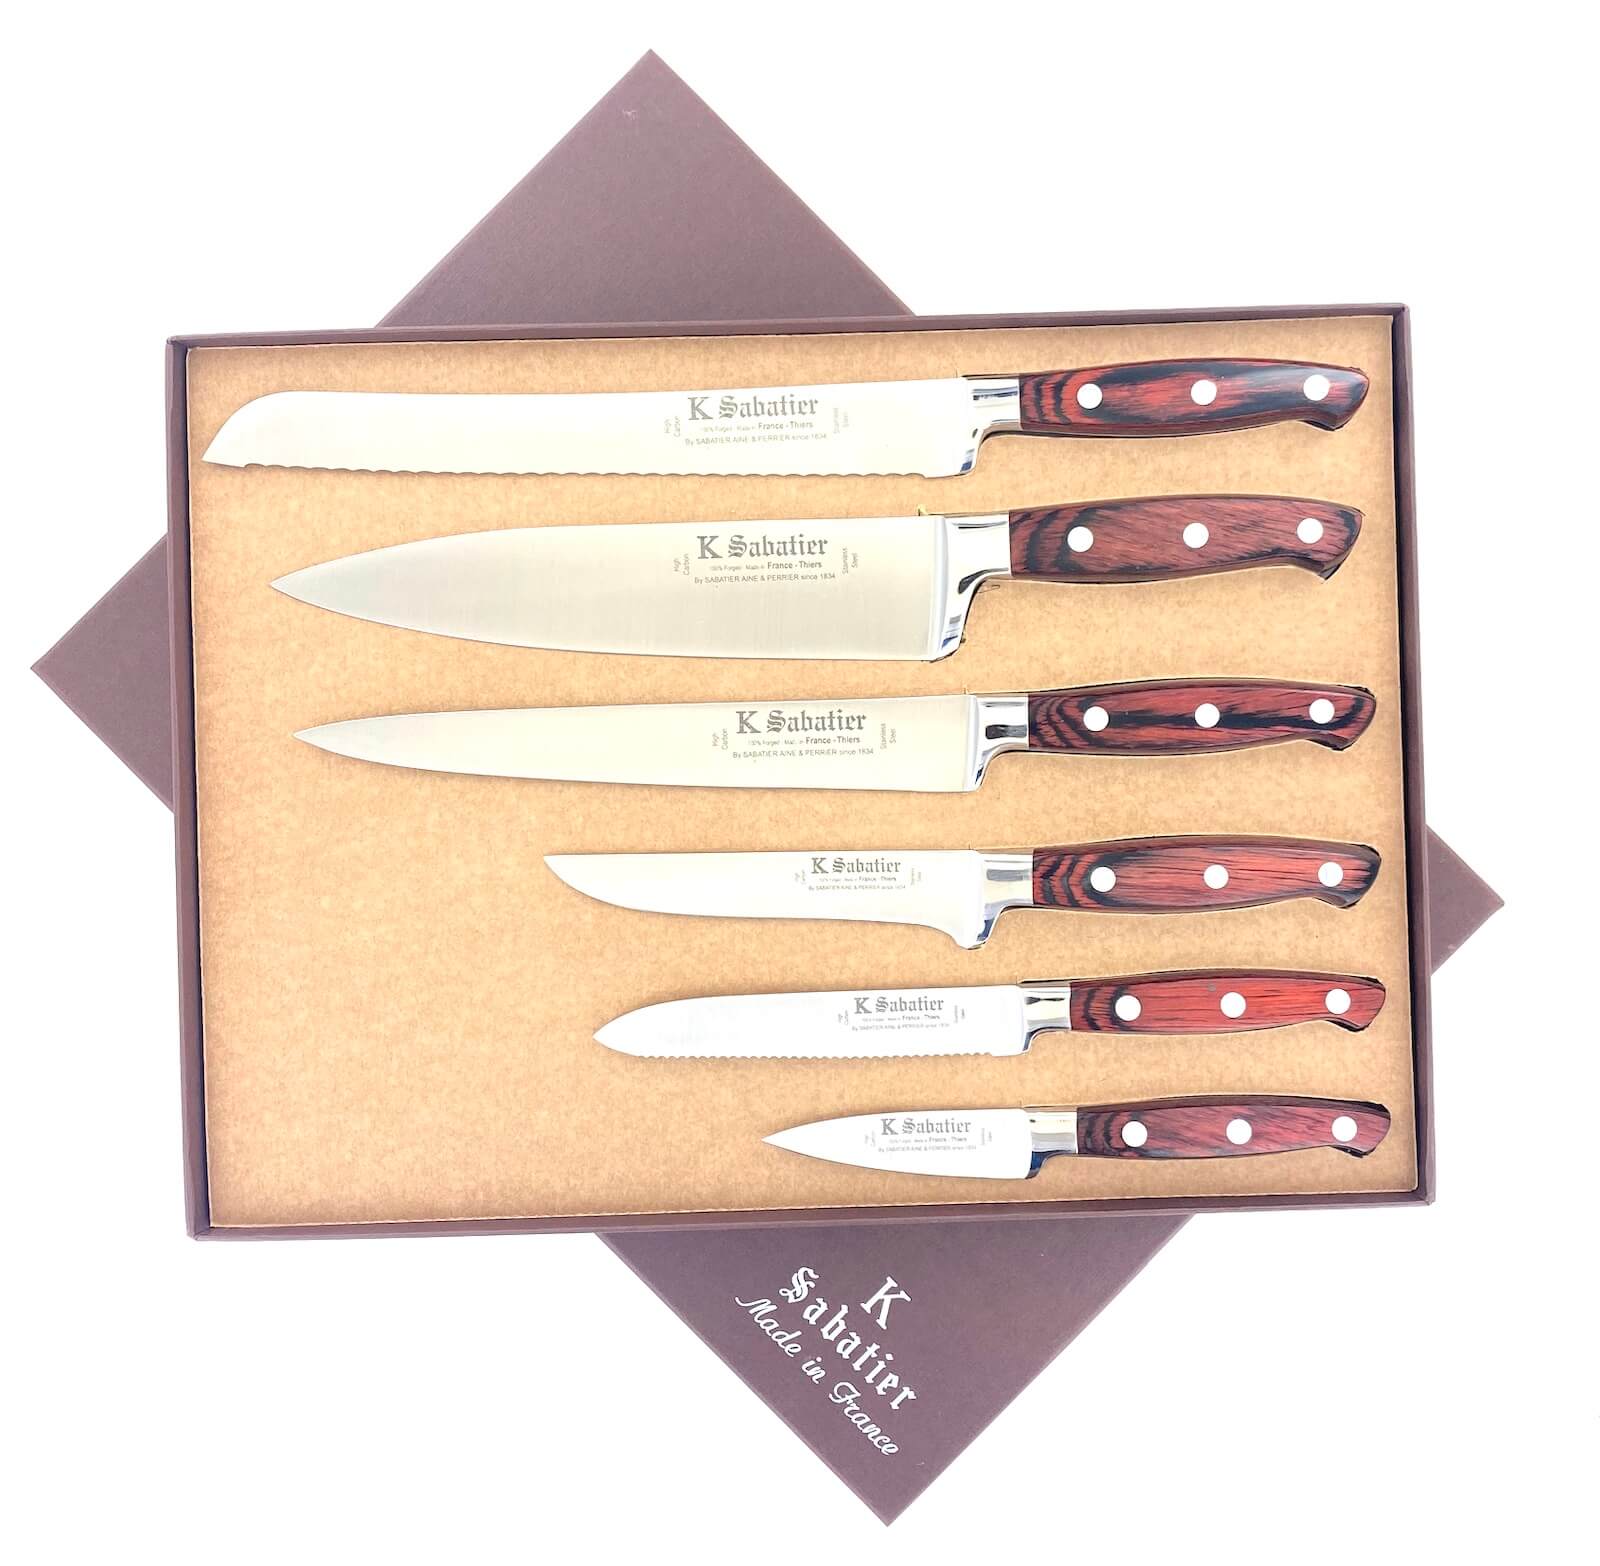 6 Pieces Professional Kitchen Knives Set With Gift Box, Stainless